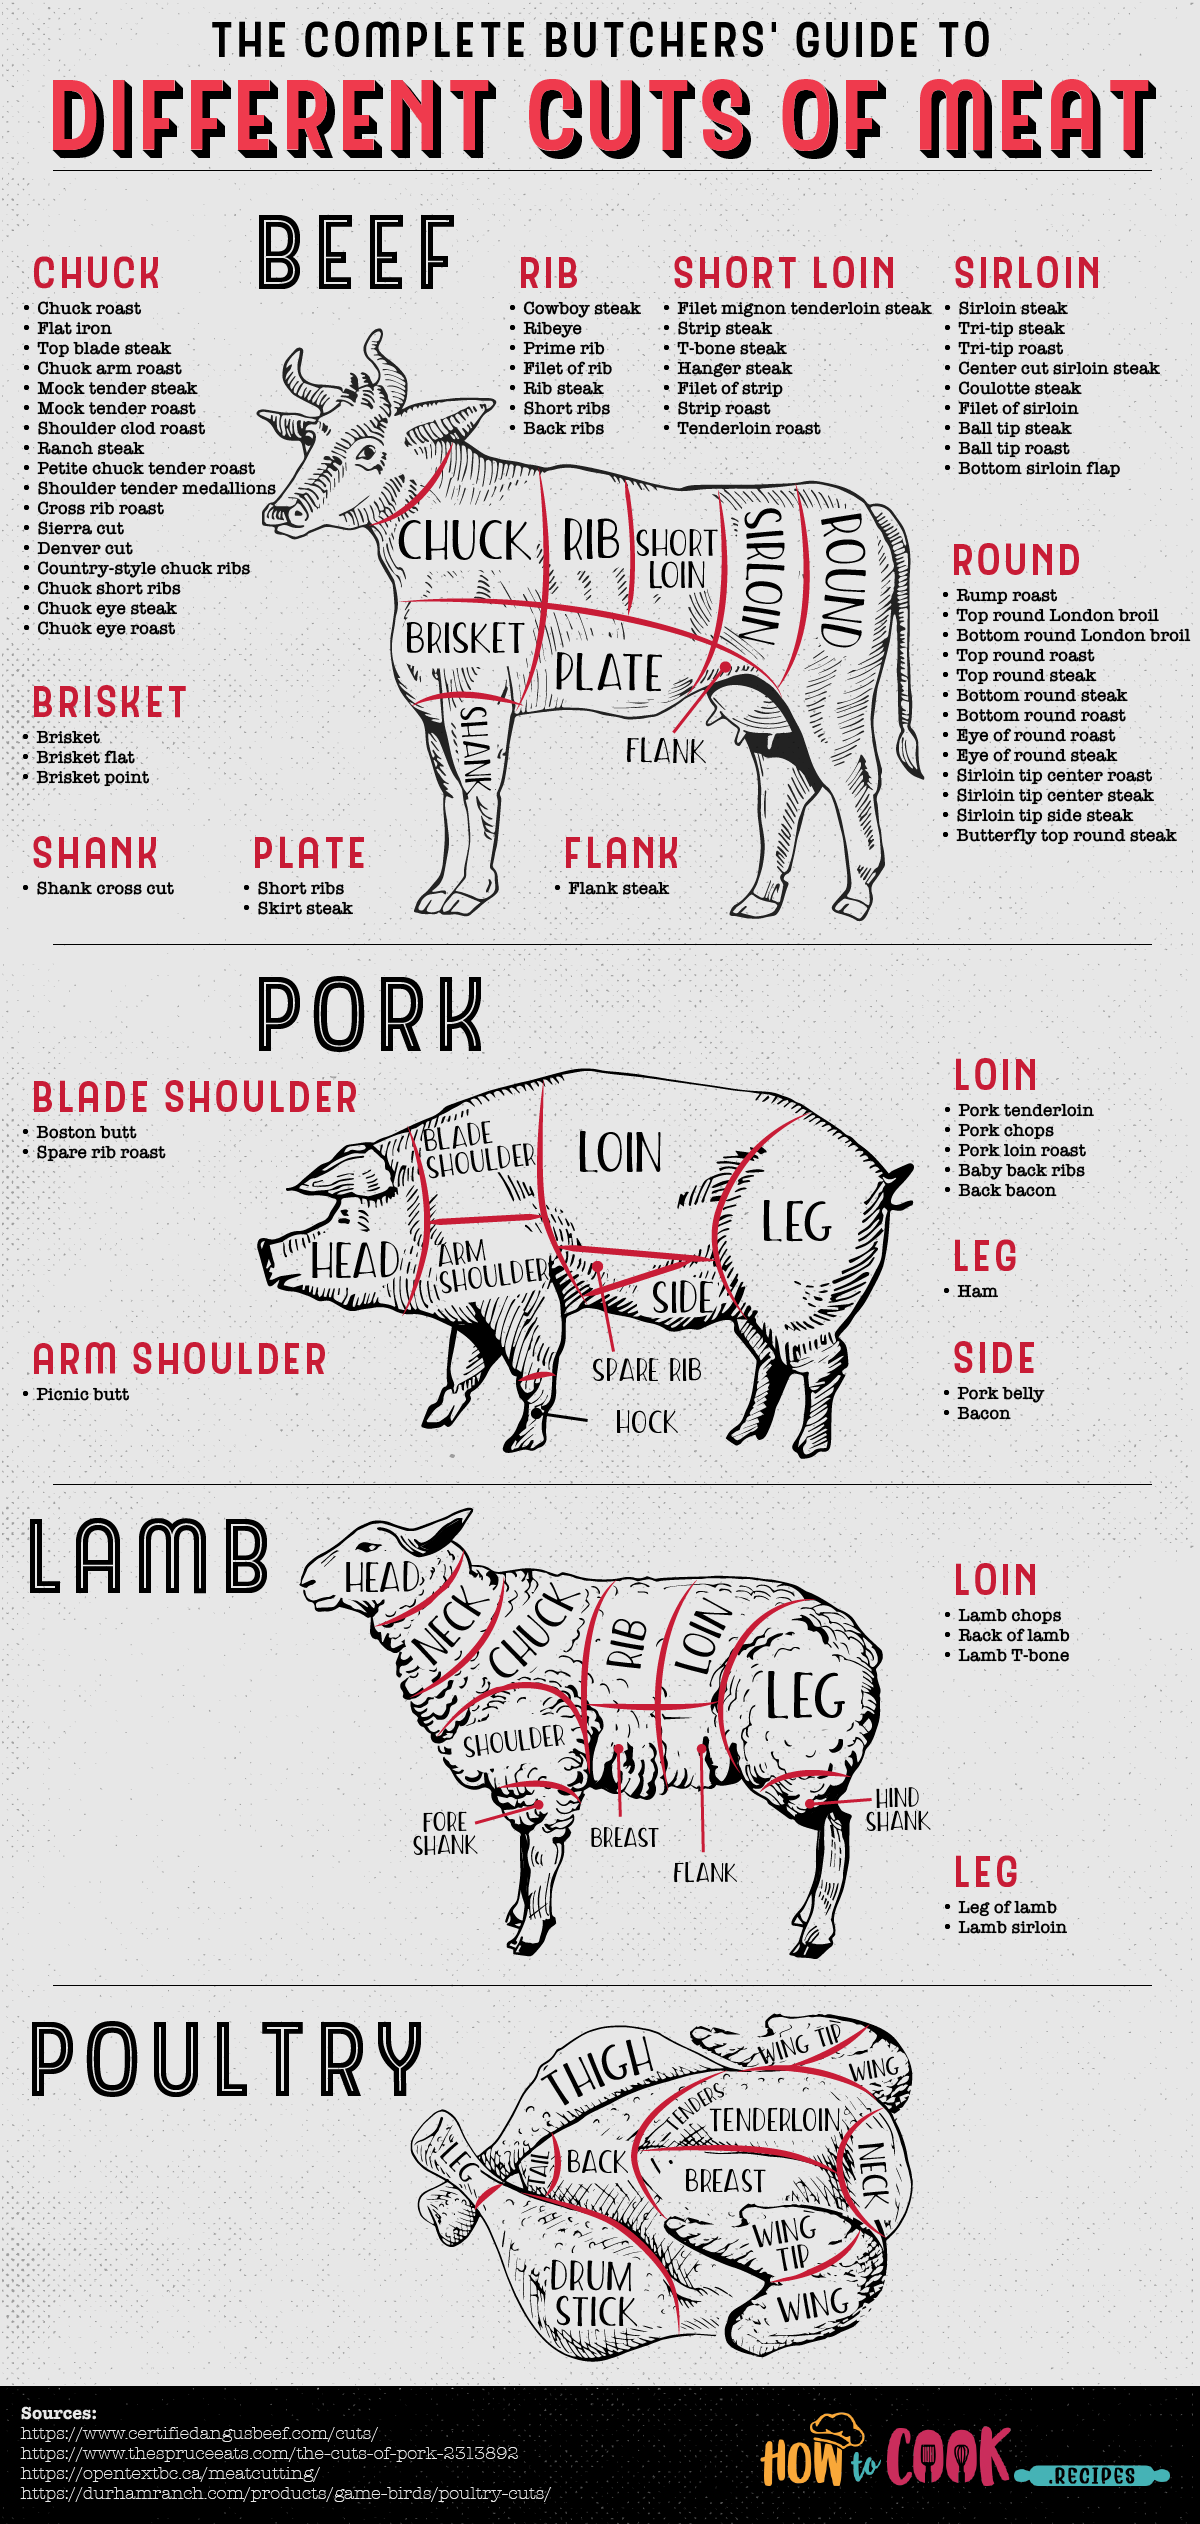 The Complete Butchers' Guide to Different Cuts of Meat | How To 